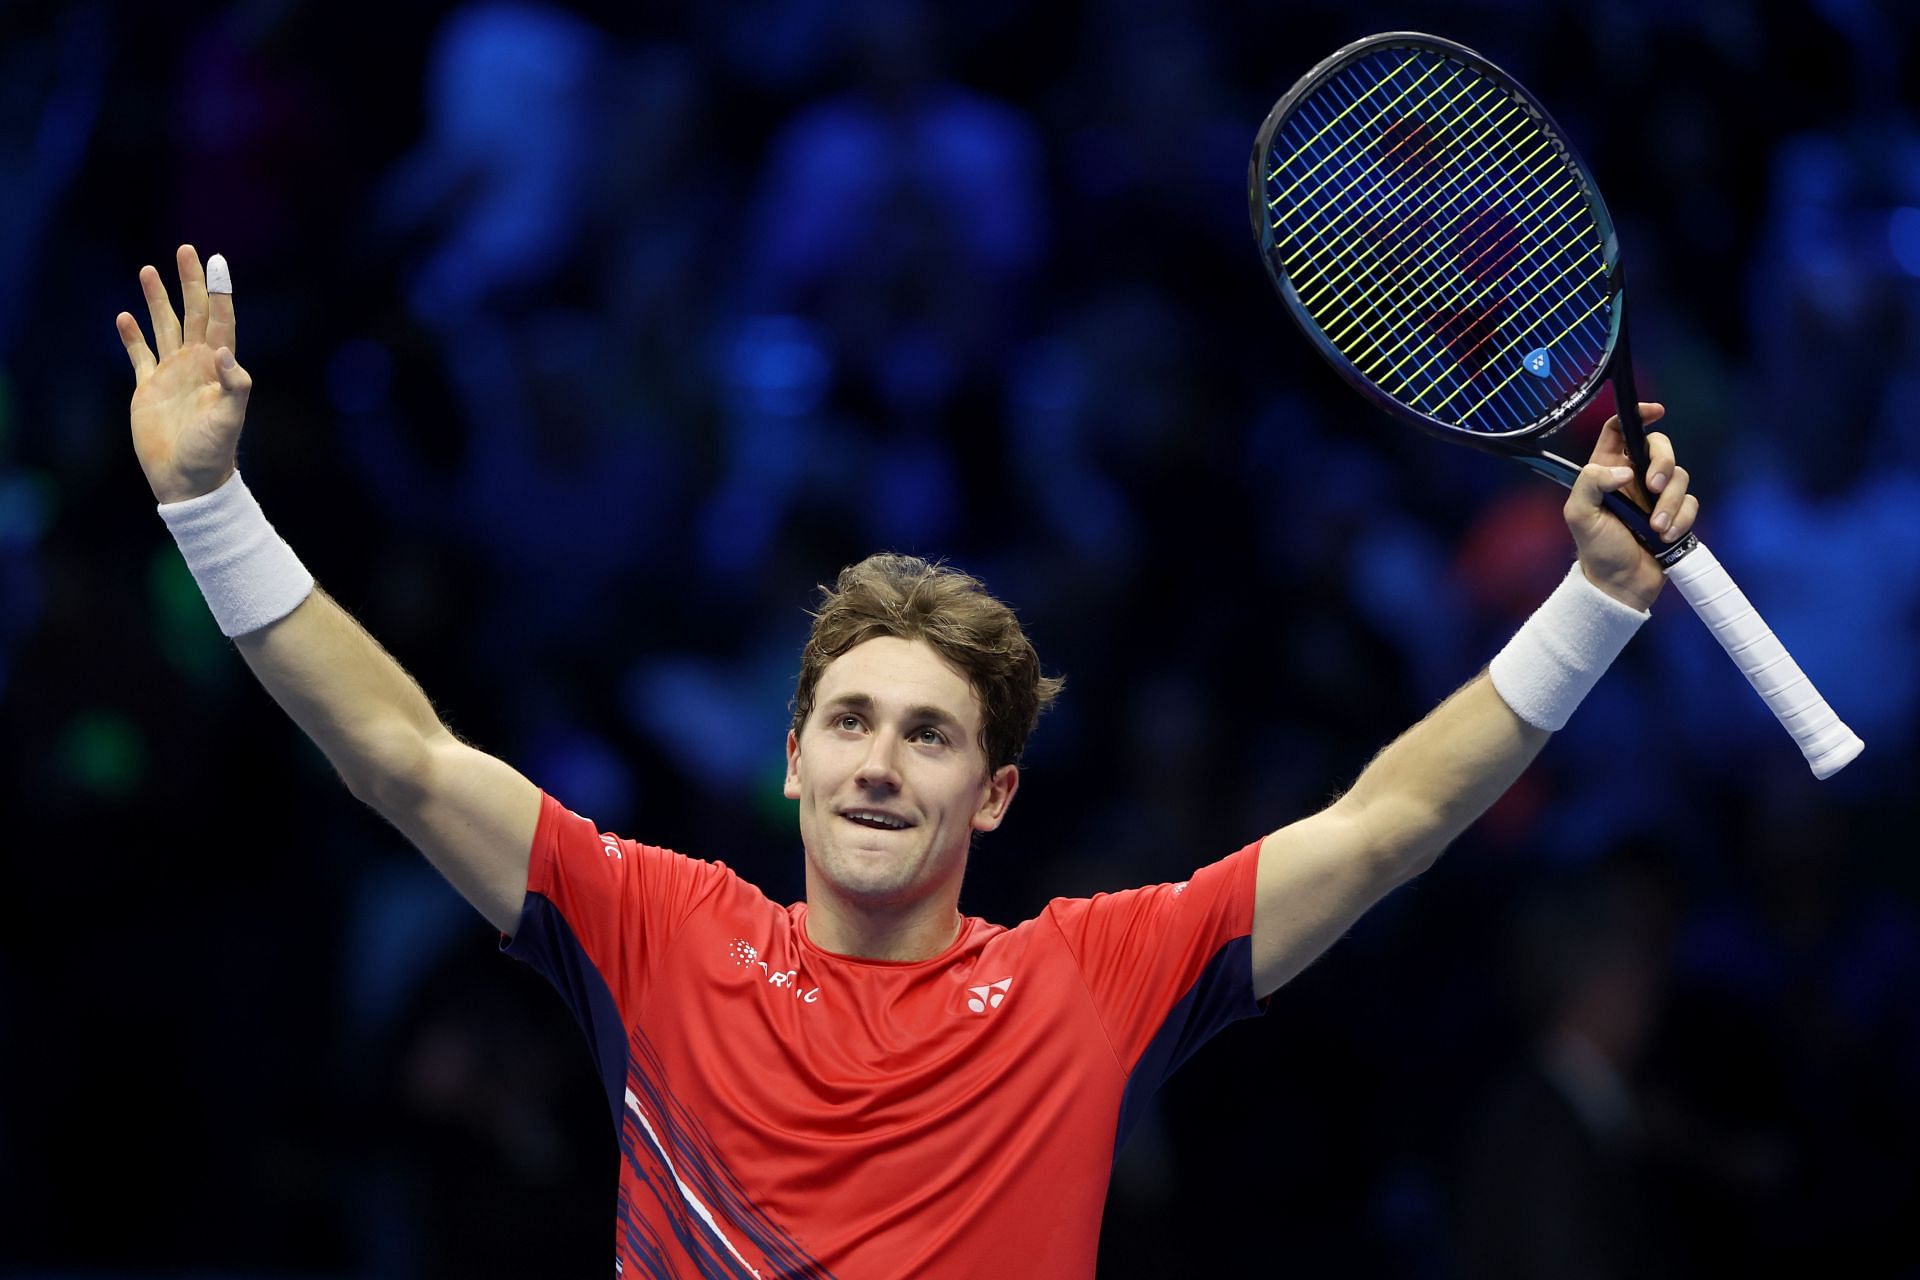 Casper Ruud celebrates his win against Andrey Rublev at the 2022 ATP Finals in Turin.